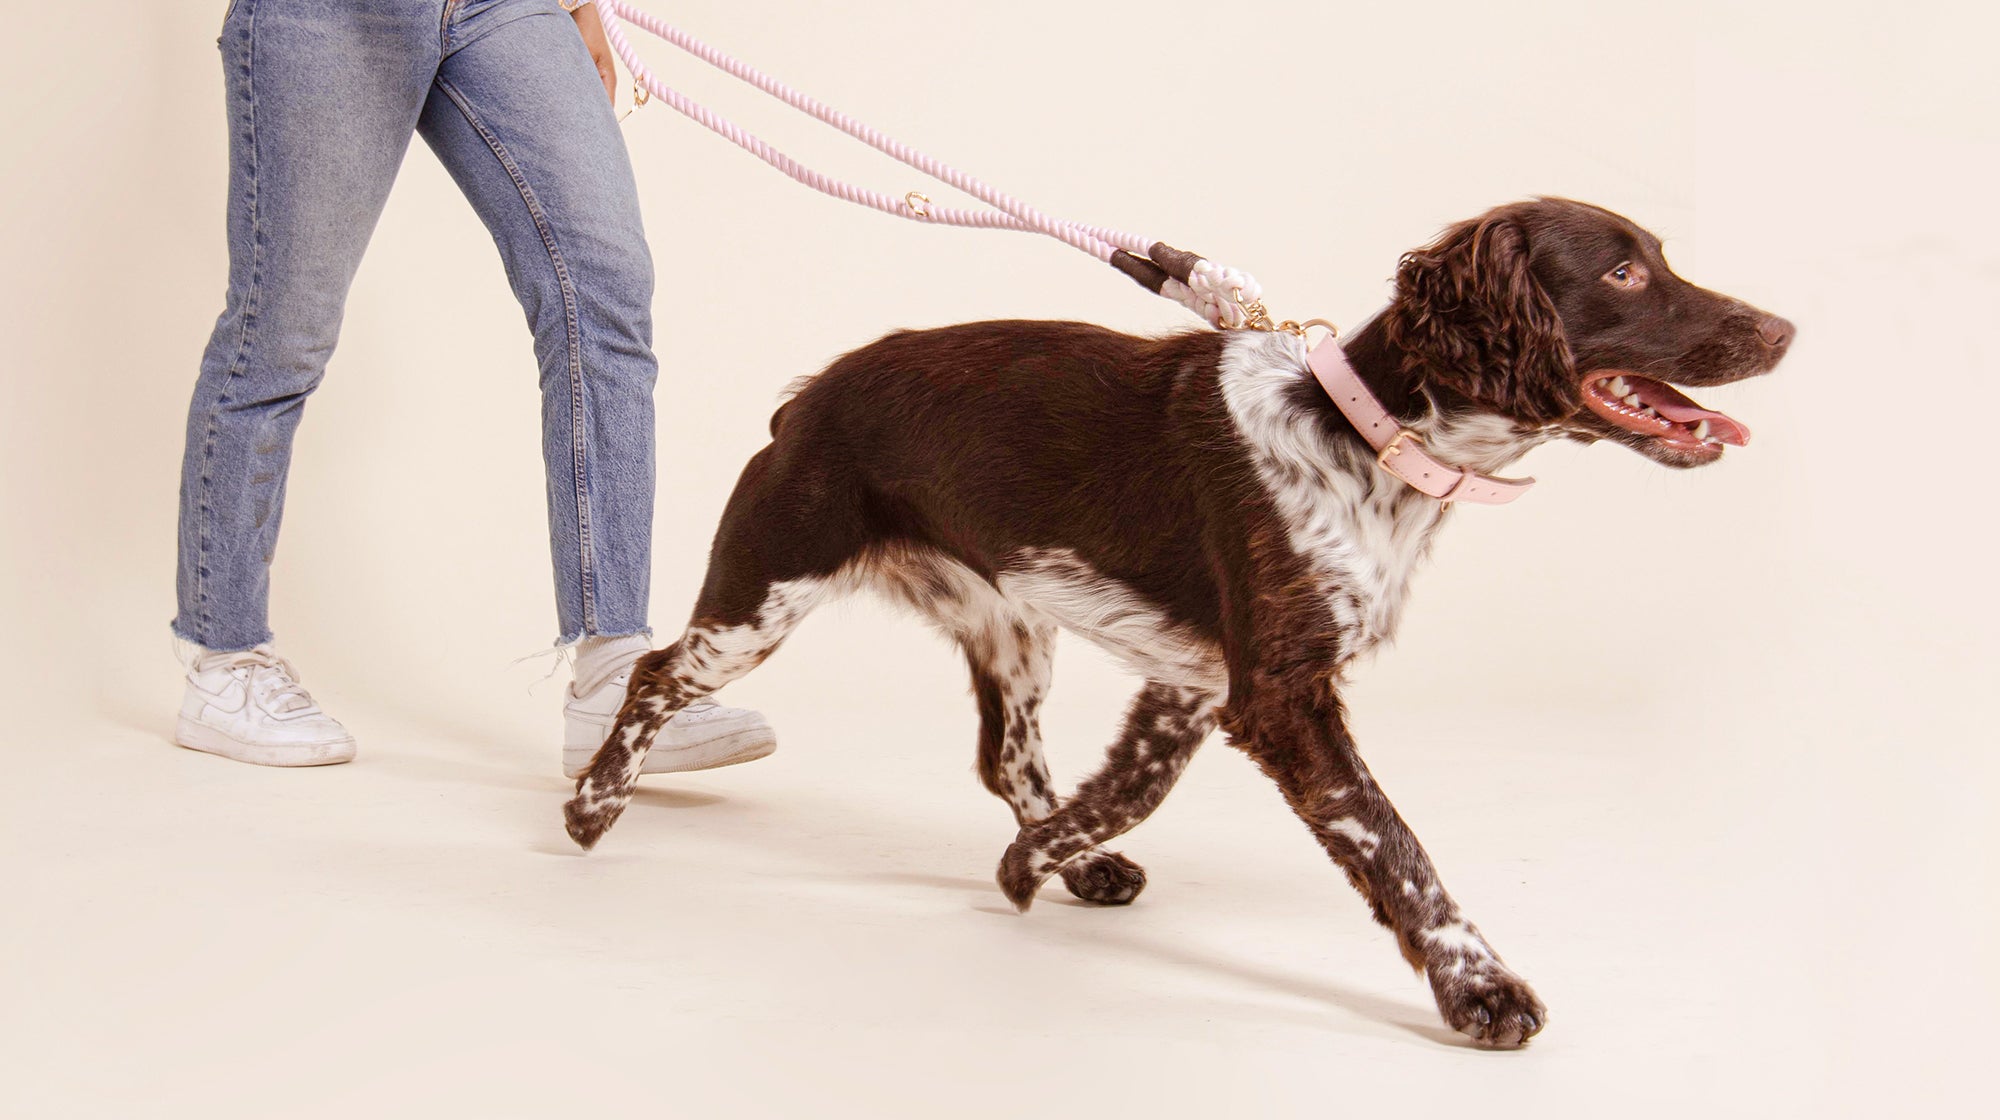 A brown and white Spaniel, on a leash with their owner, against a pale pink background